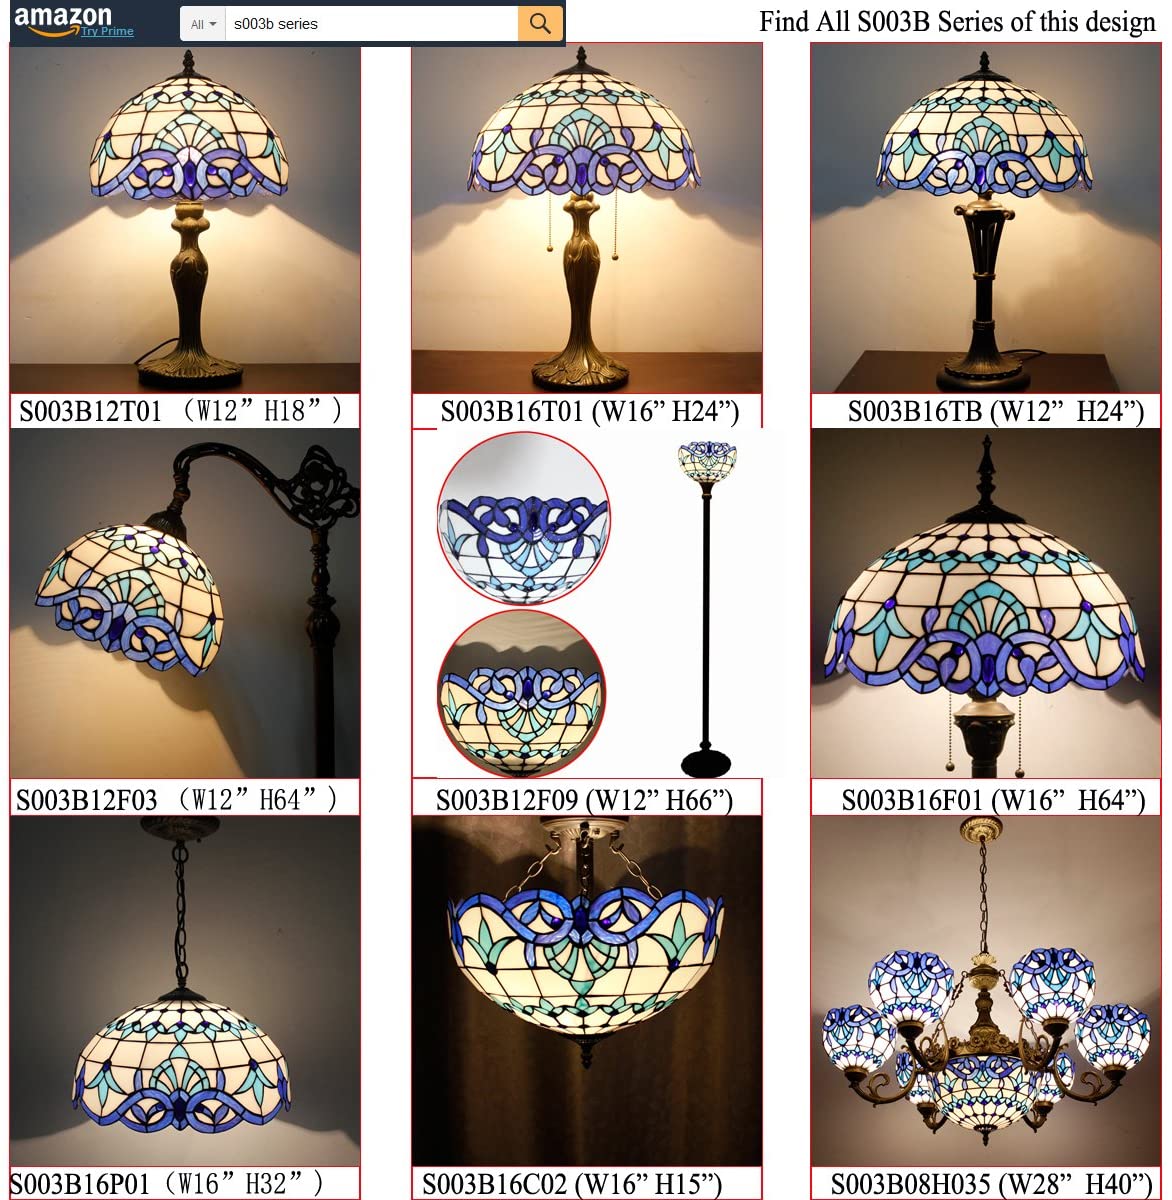 SHADY  Table Lamp Navy Blue Baroque Stained Glass Style Desk Bedside Reading Light 12X12X18 Inches Decor Bedroom Living Room Home Office S003B Series